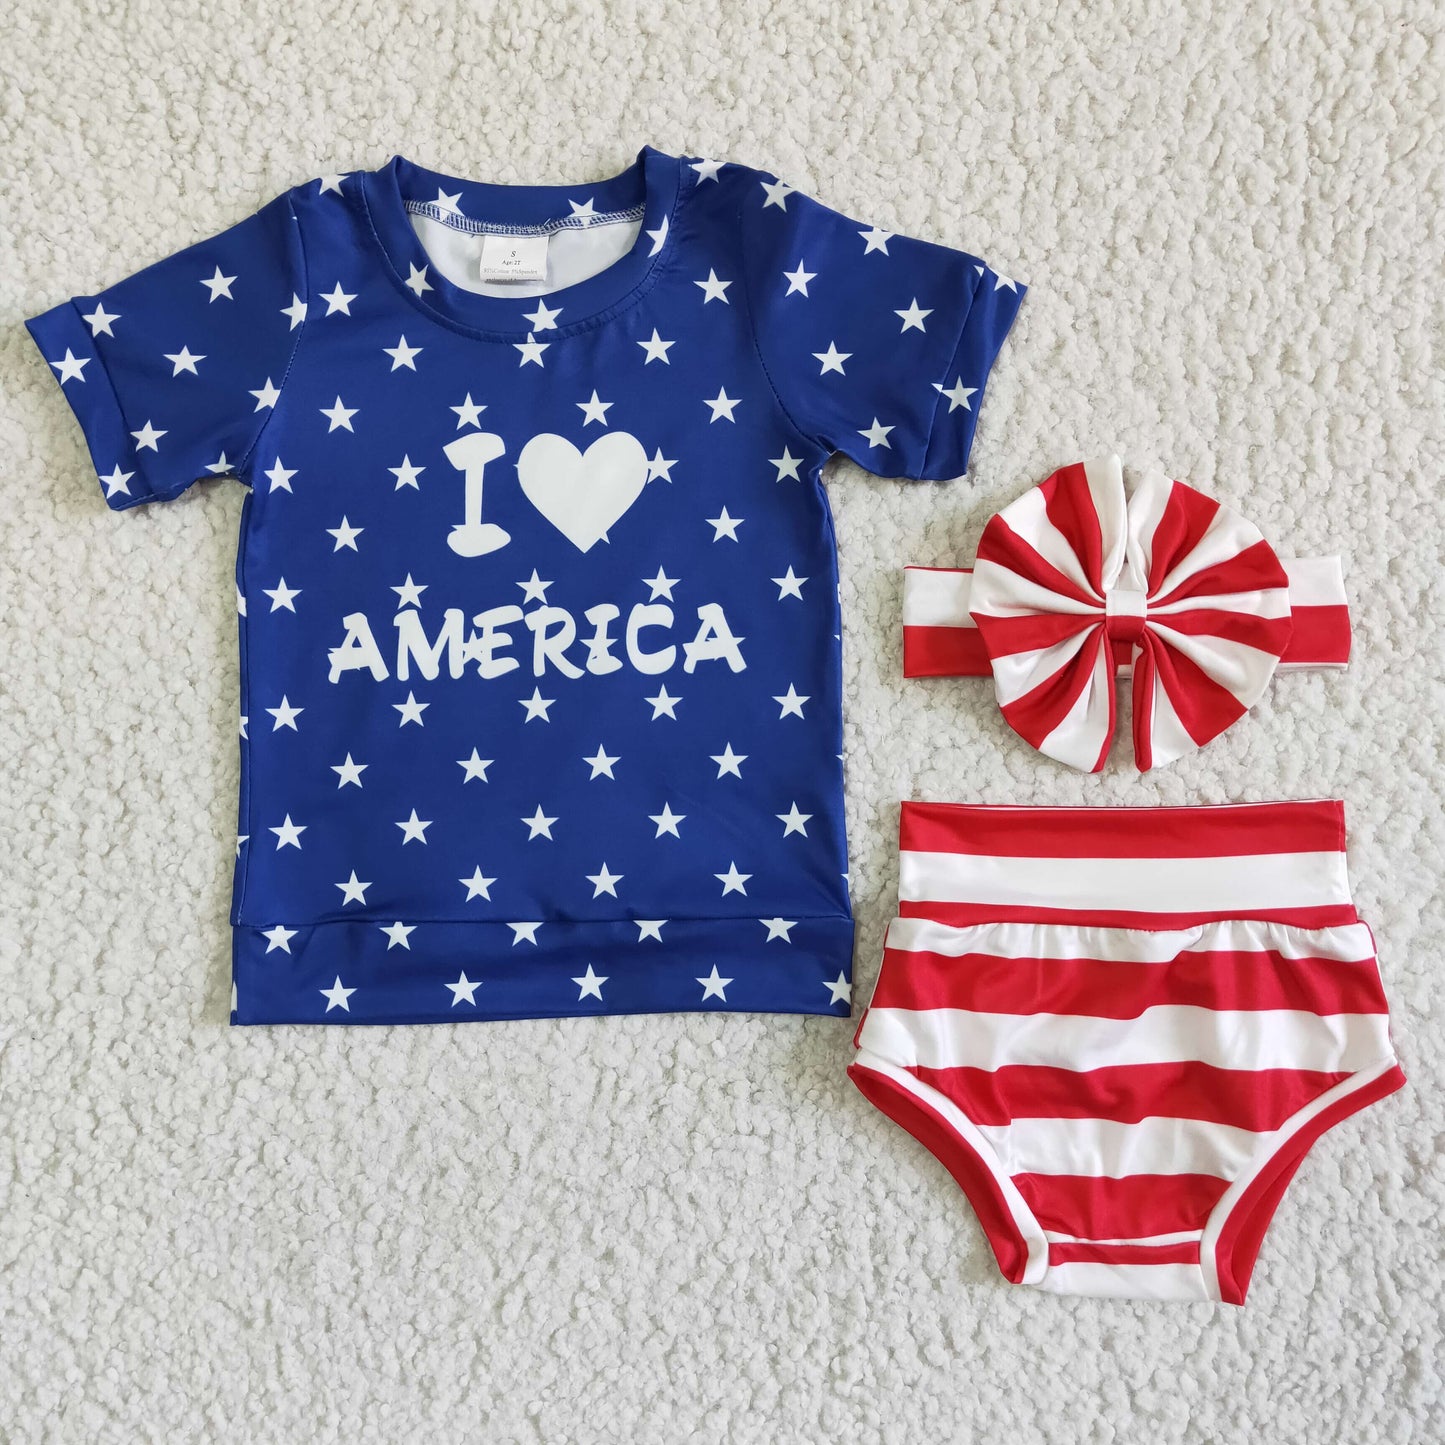 I love America star and stripe baby 4th of july bummies set